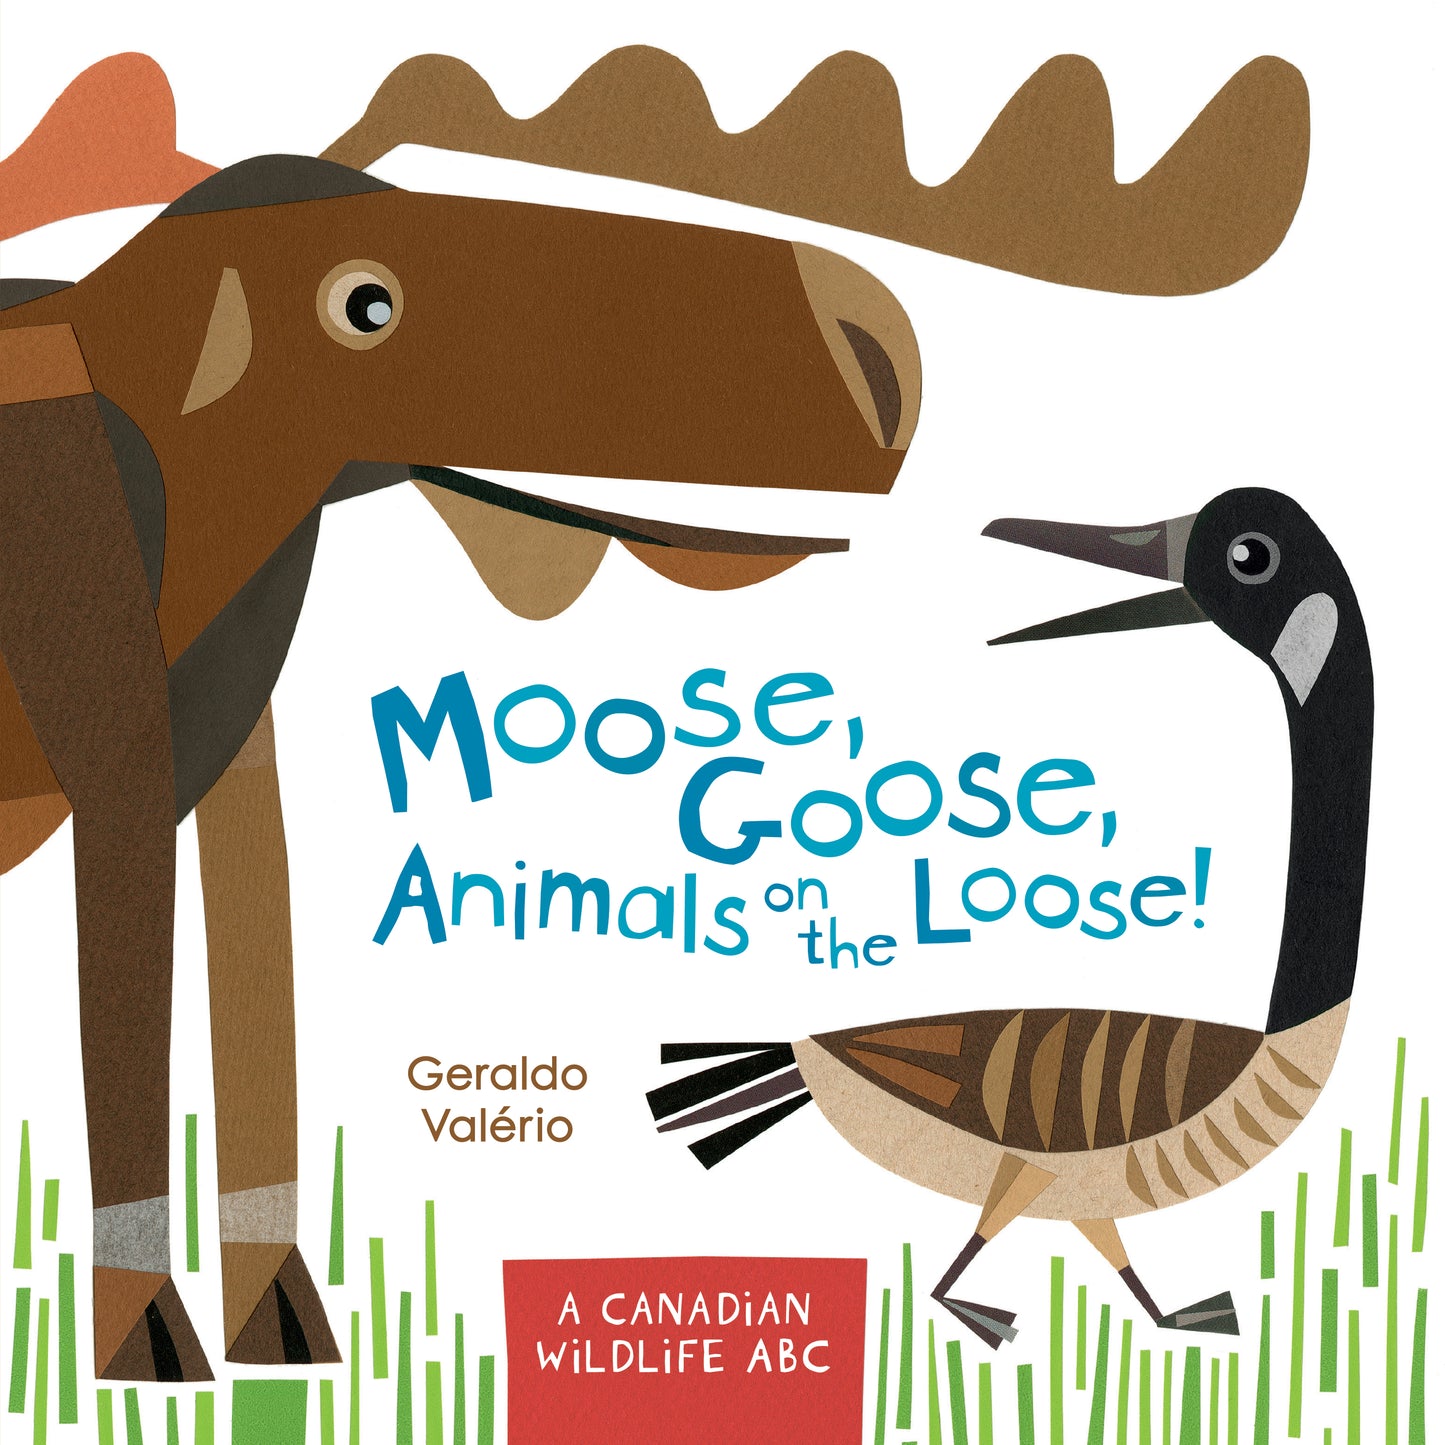 Moose, Goose, Animals on the Loose: A Canadian wildlife ABC